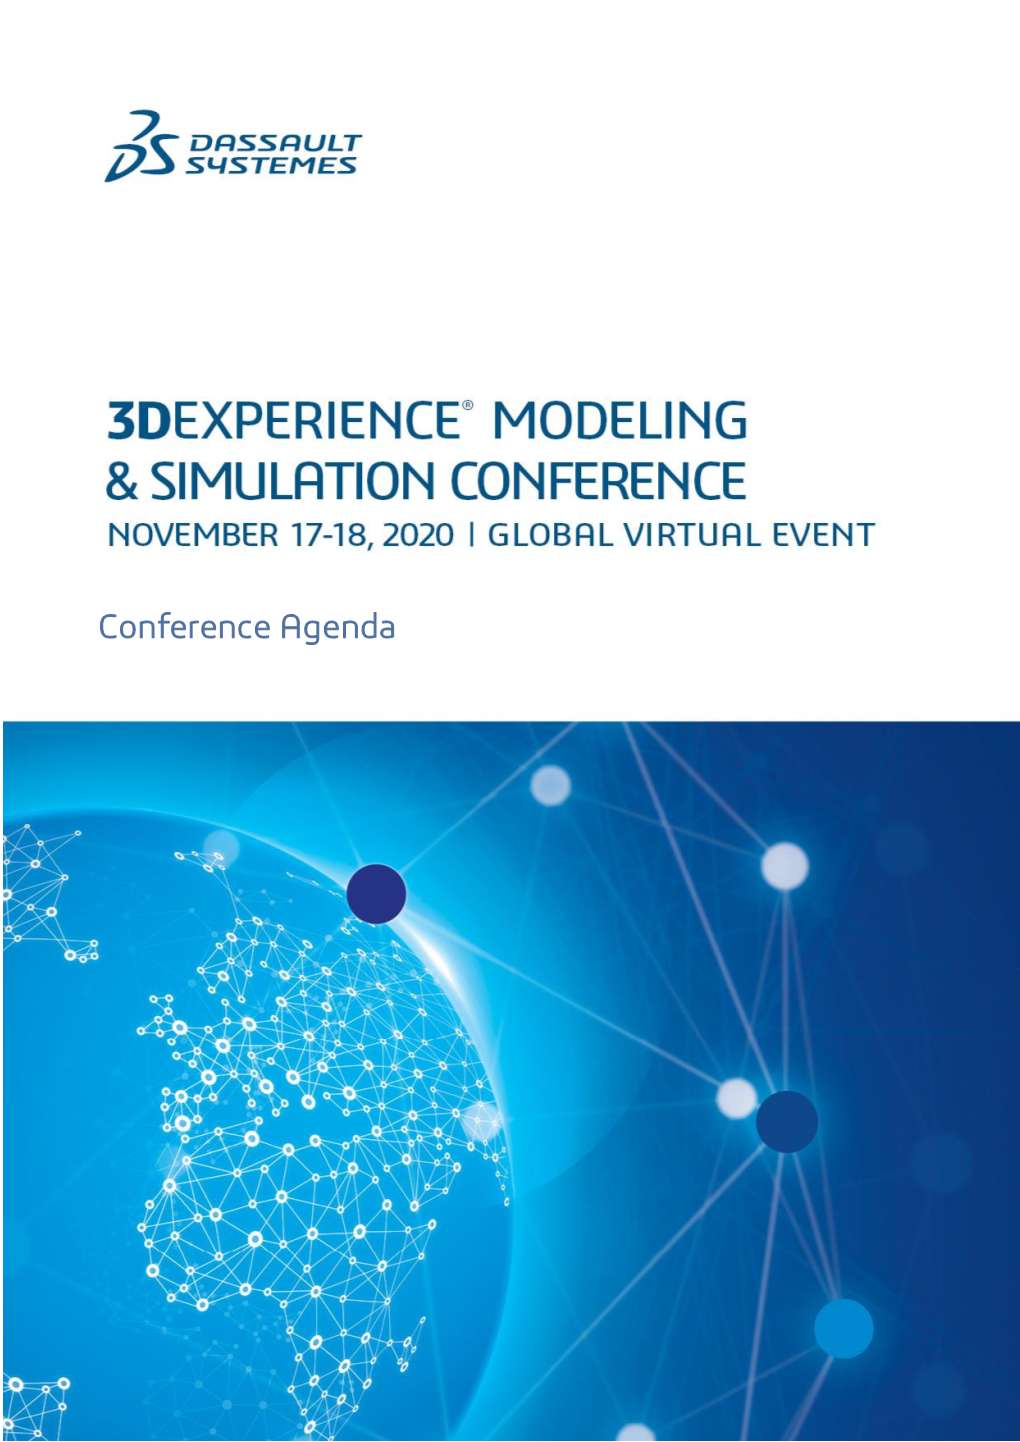 Global 3DEXPERIENCE Modeling & Simulation Conference